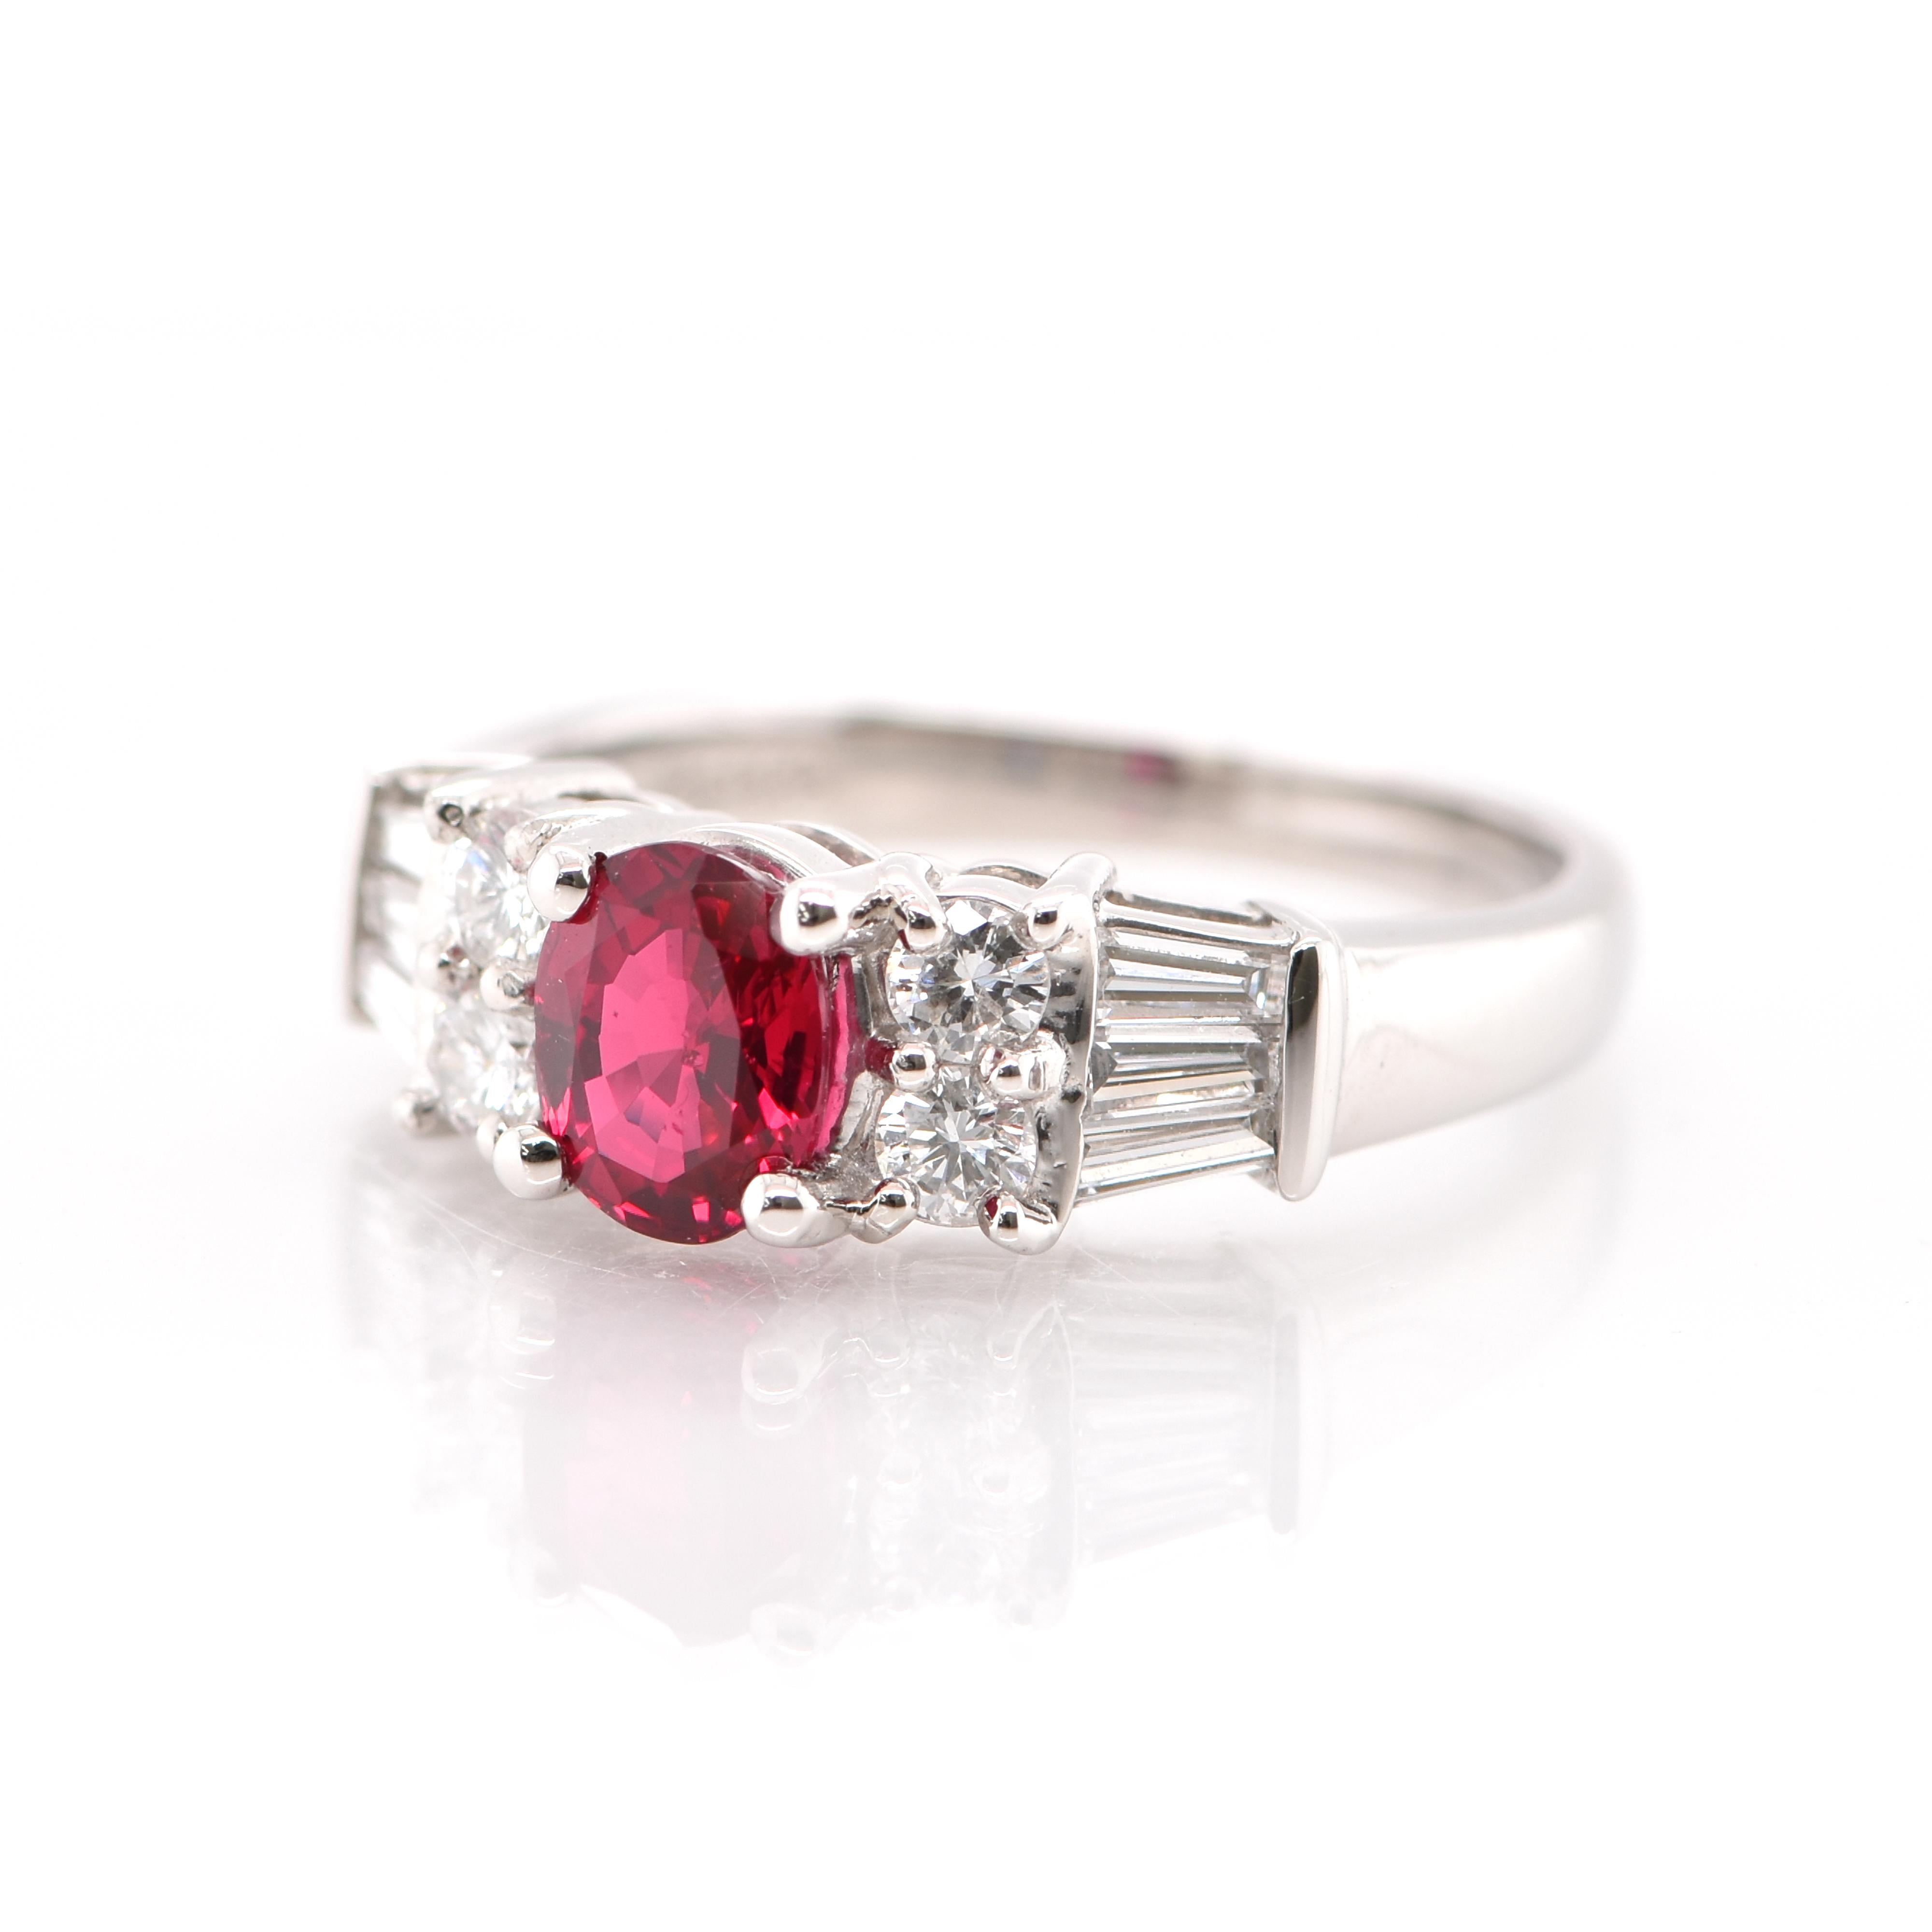 A beautiful Engagement Ring featuring a 1.00 Carat Natural Ruby and 0.58 Carats of Diamond Accents set in Platinum. Rubies are referred to as 